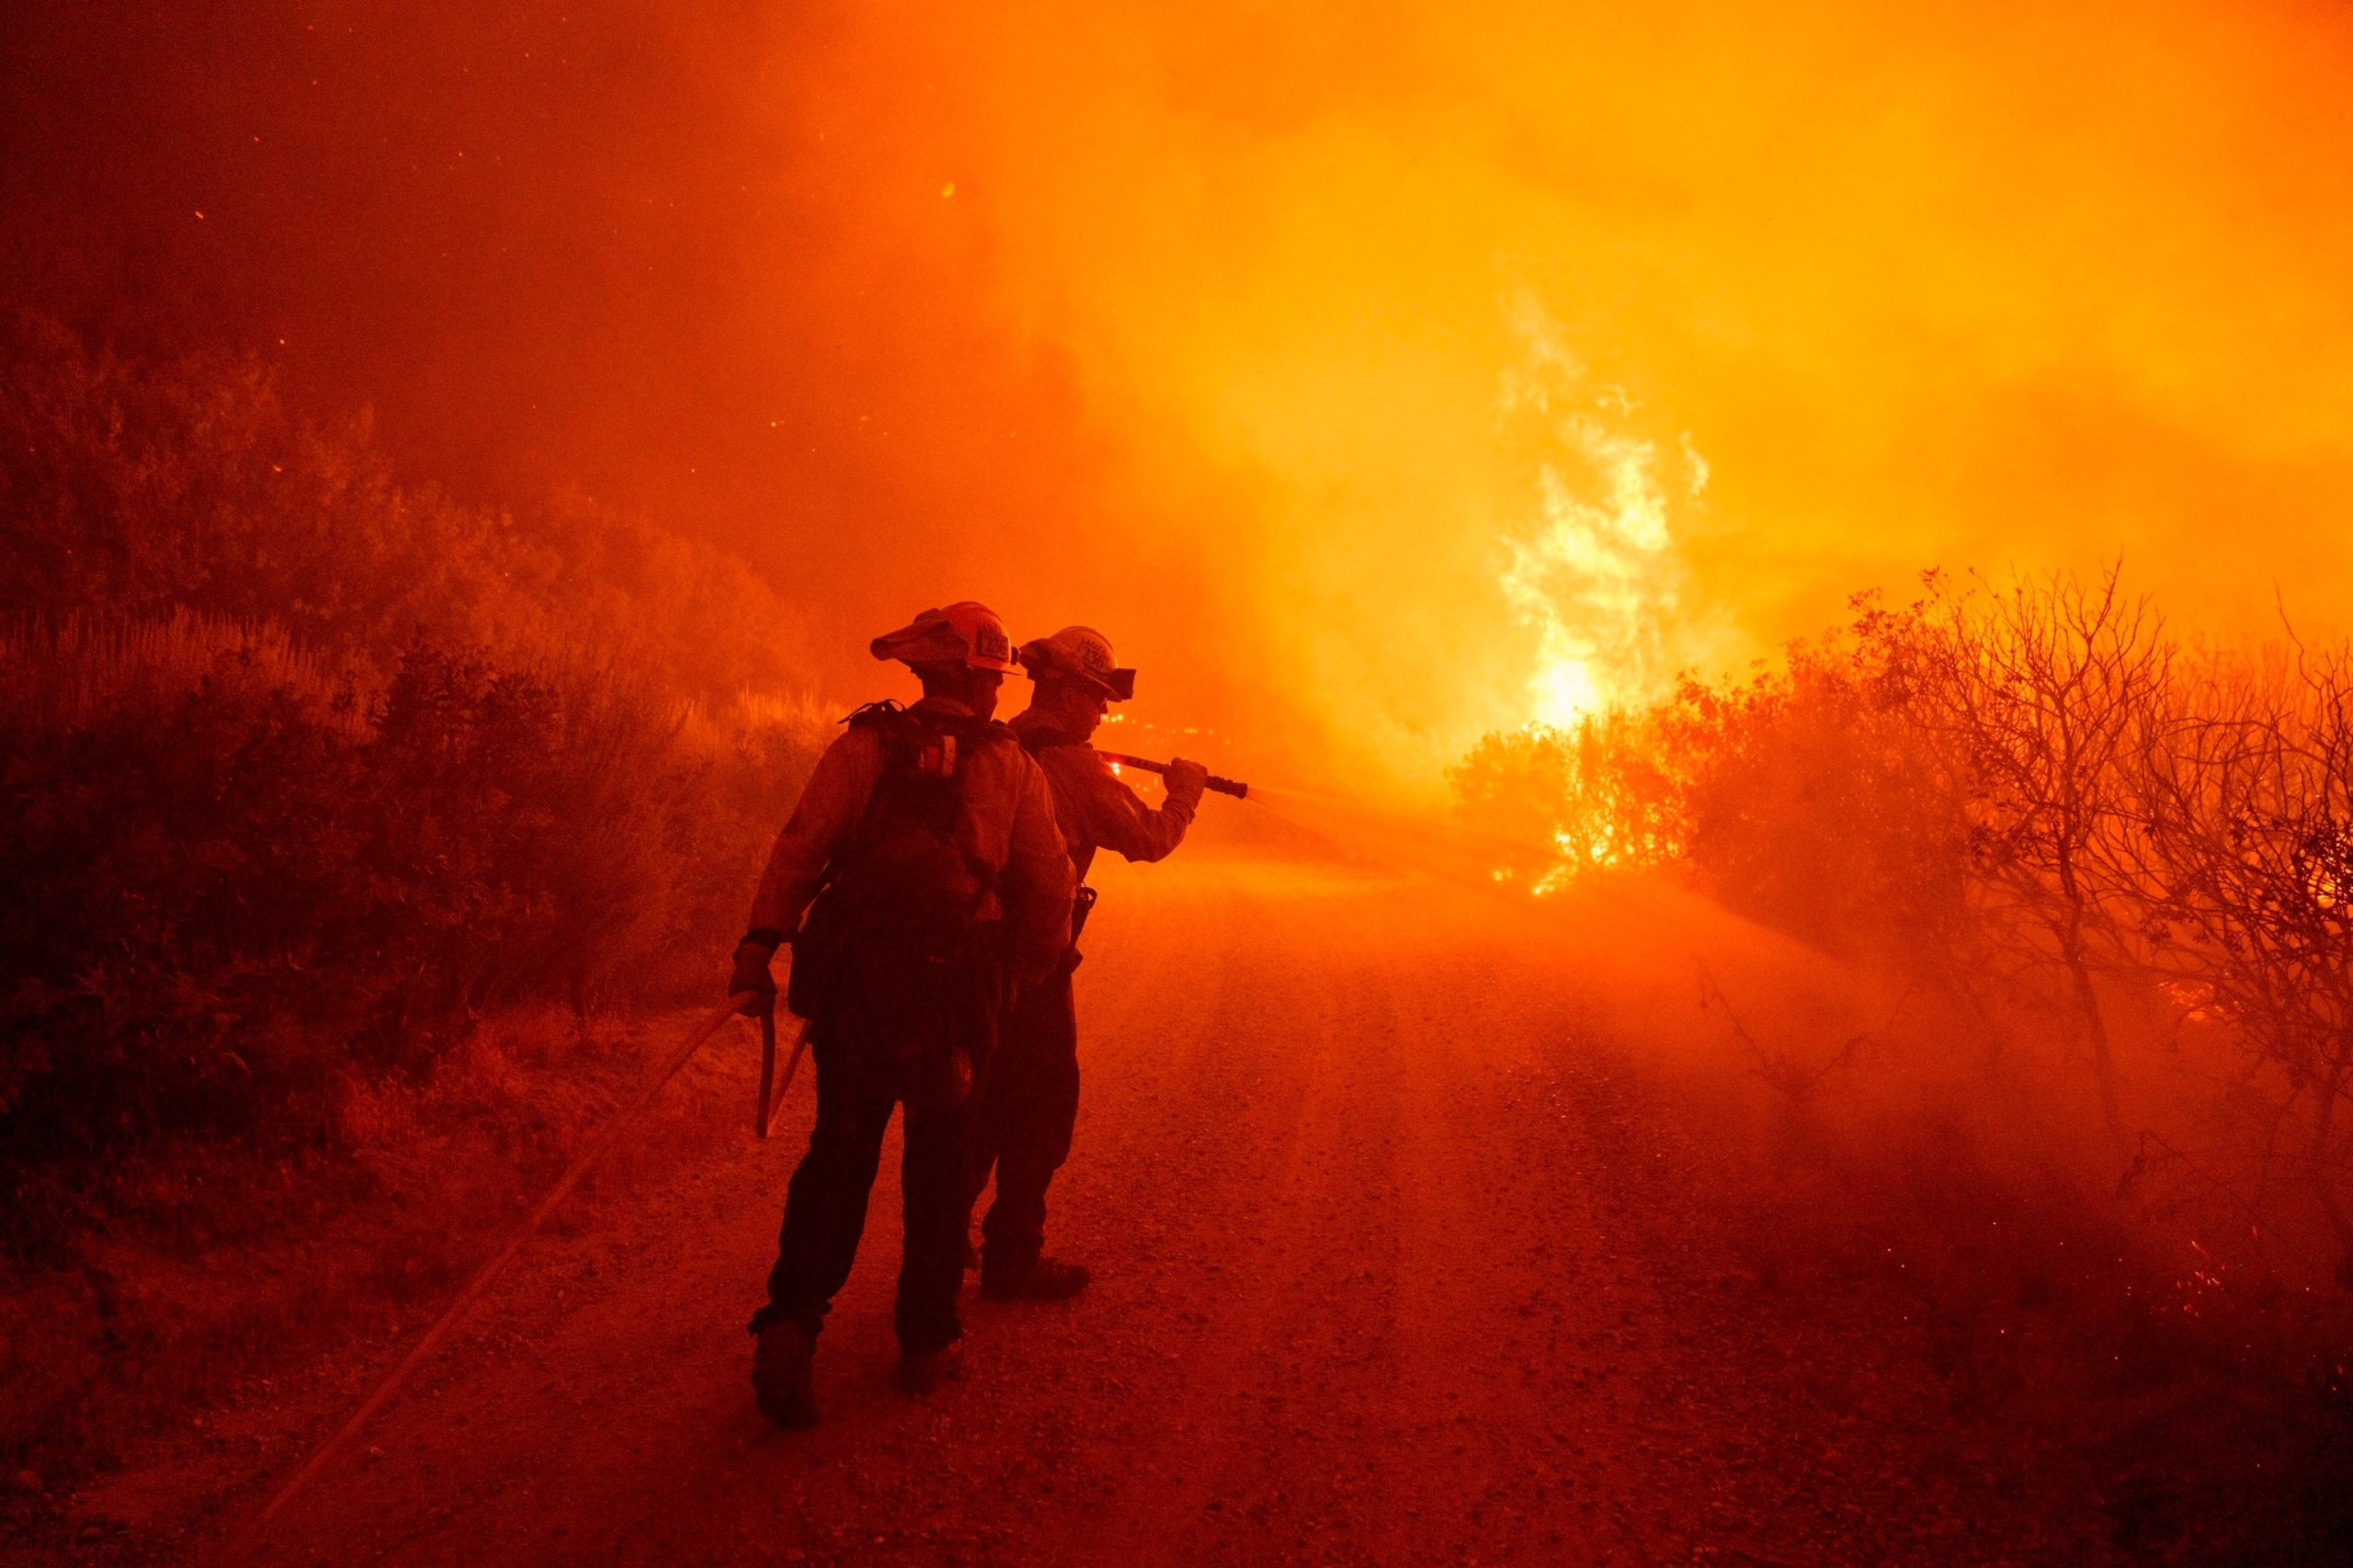 Wildfire near Los Angeles grows to 11,000 acres, prompting evacuations